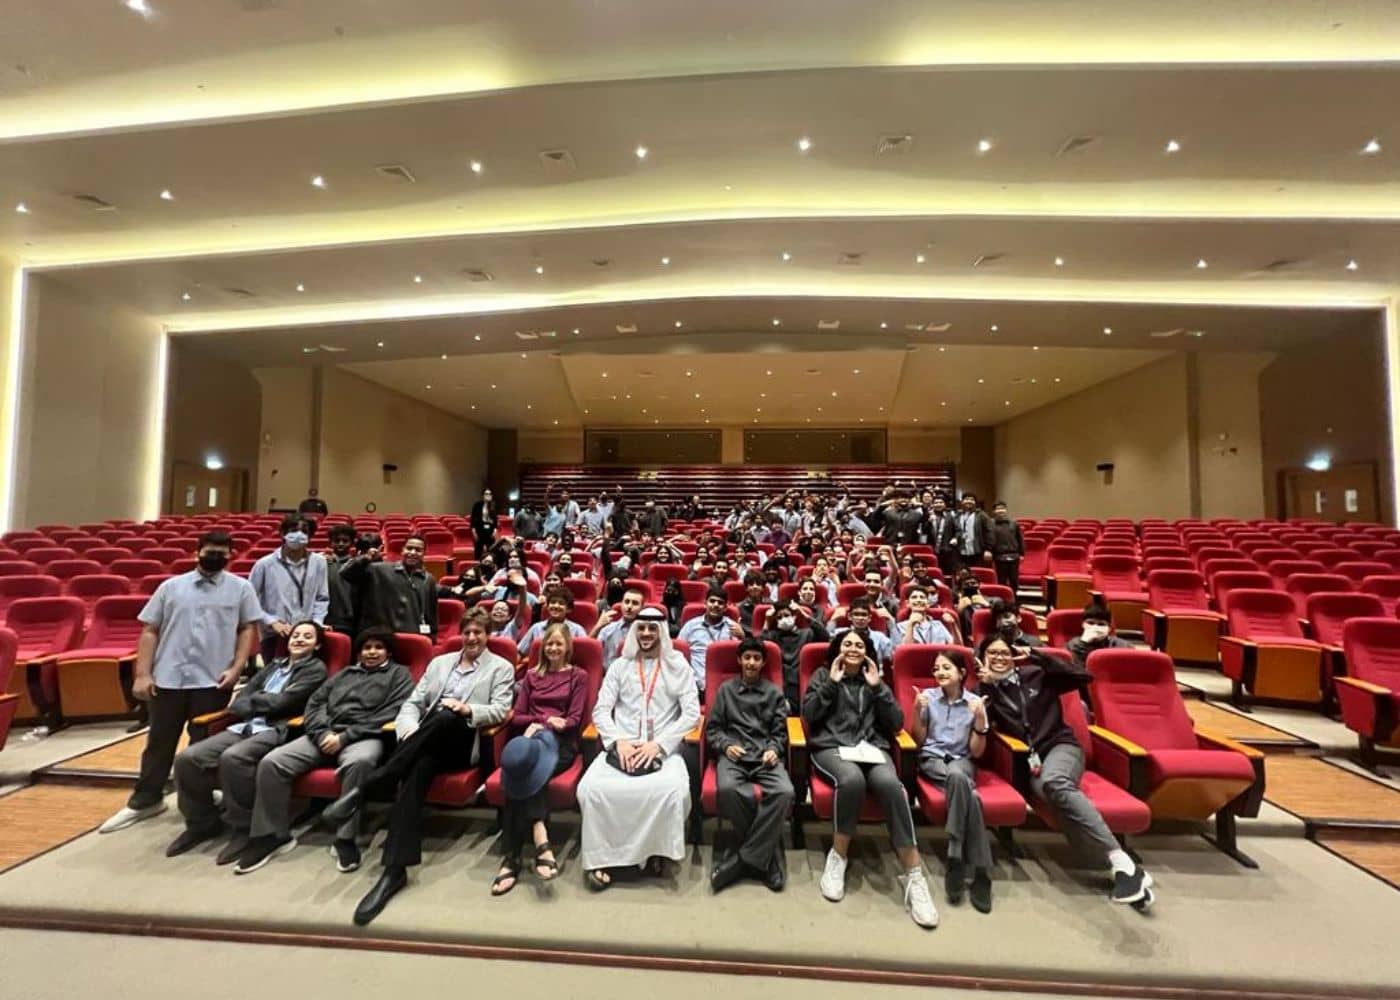 Author Daniel Palmer at Abu Dhabi International School for the Author Visit event